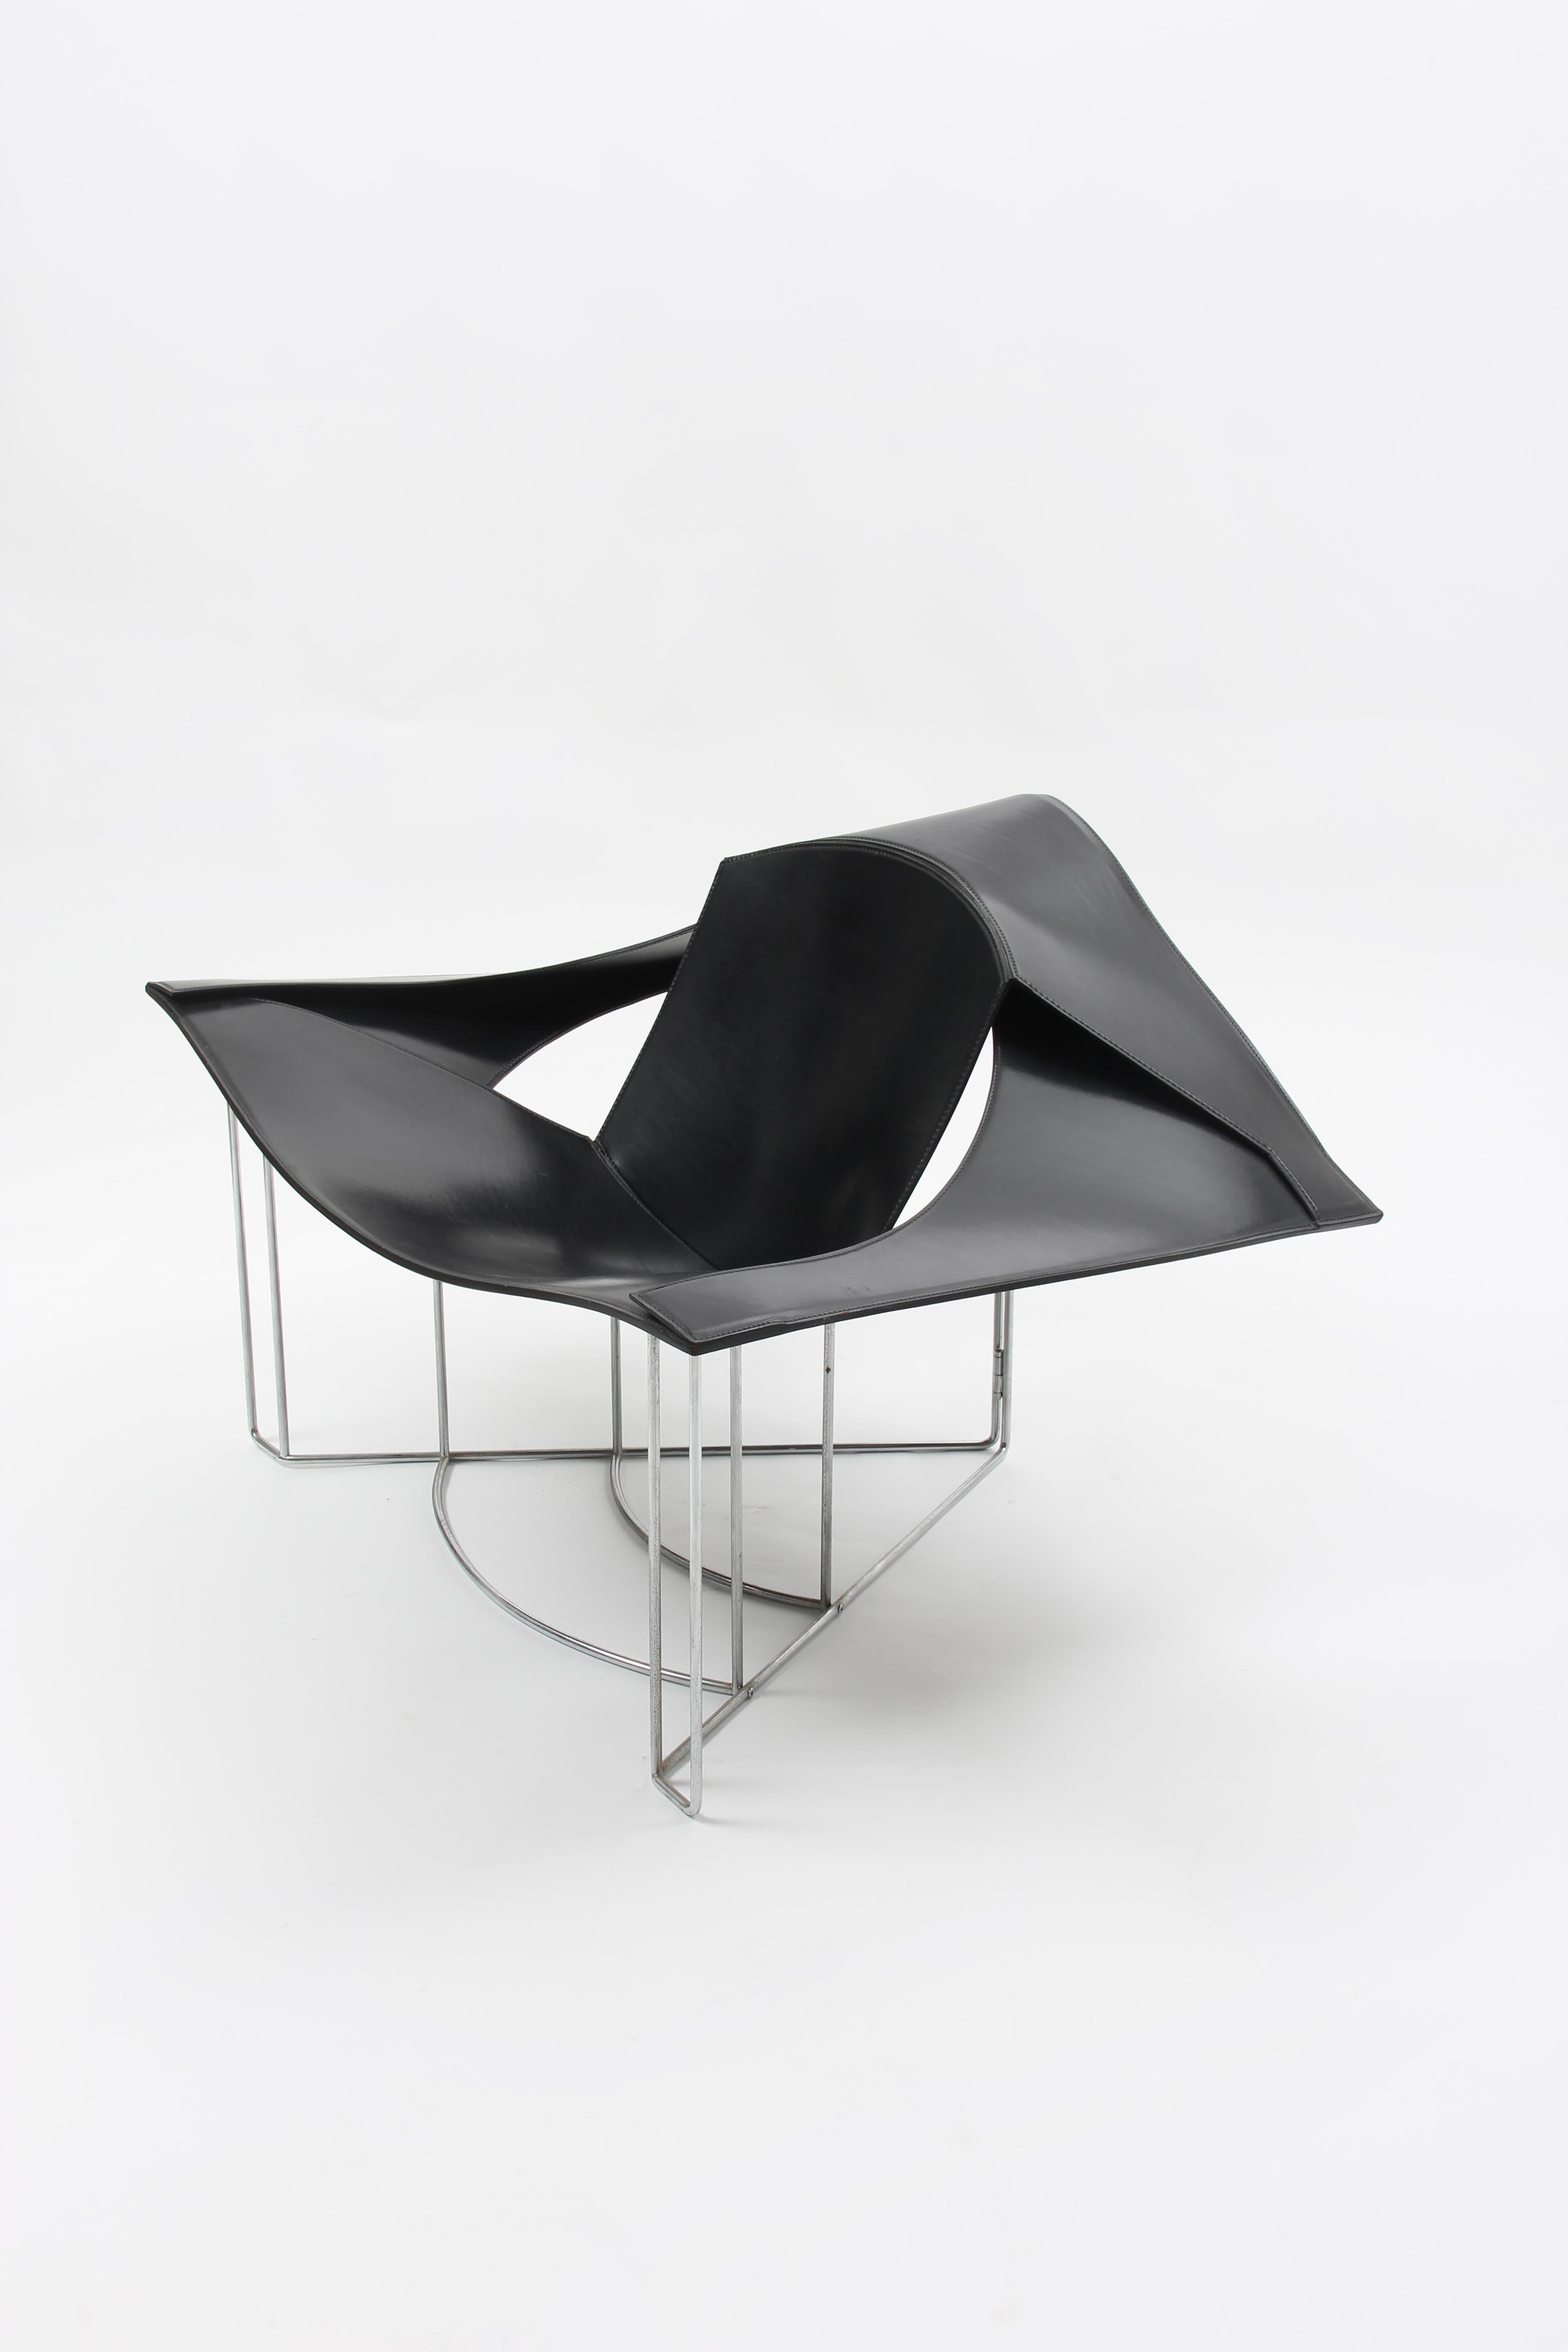 Late 20th Century Lounge Chair by Jacques Harold Pollard for Matteo Grassi, 1990s